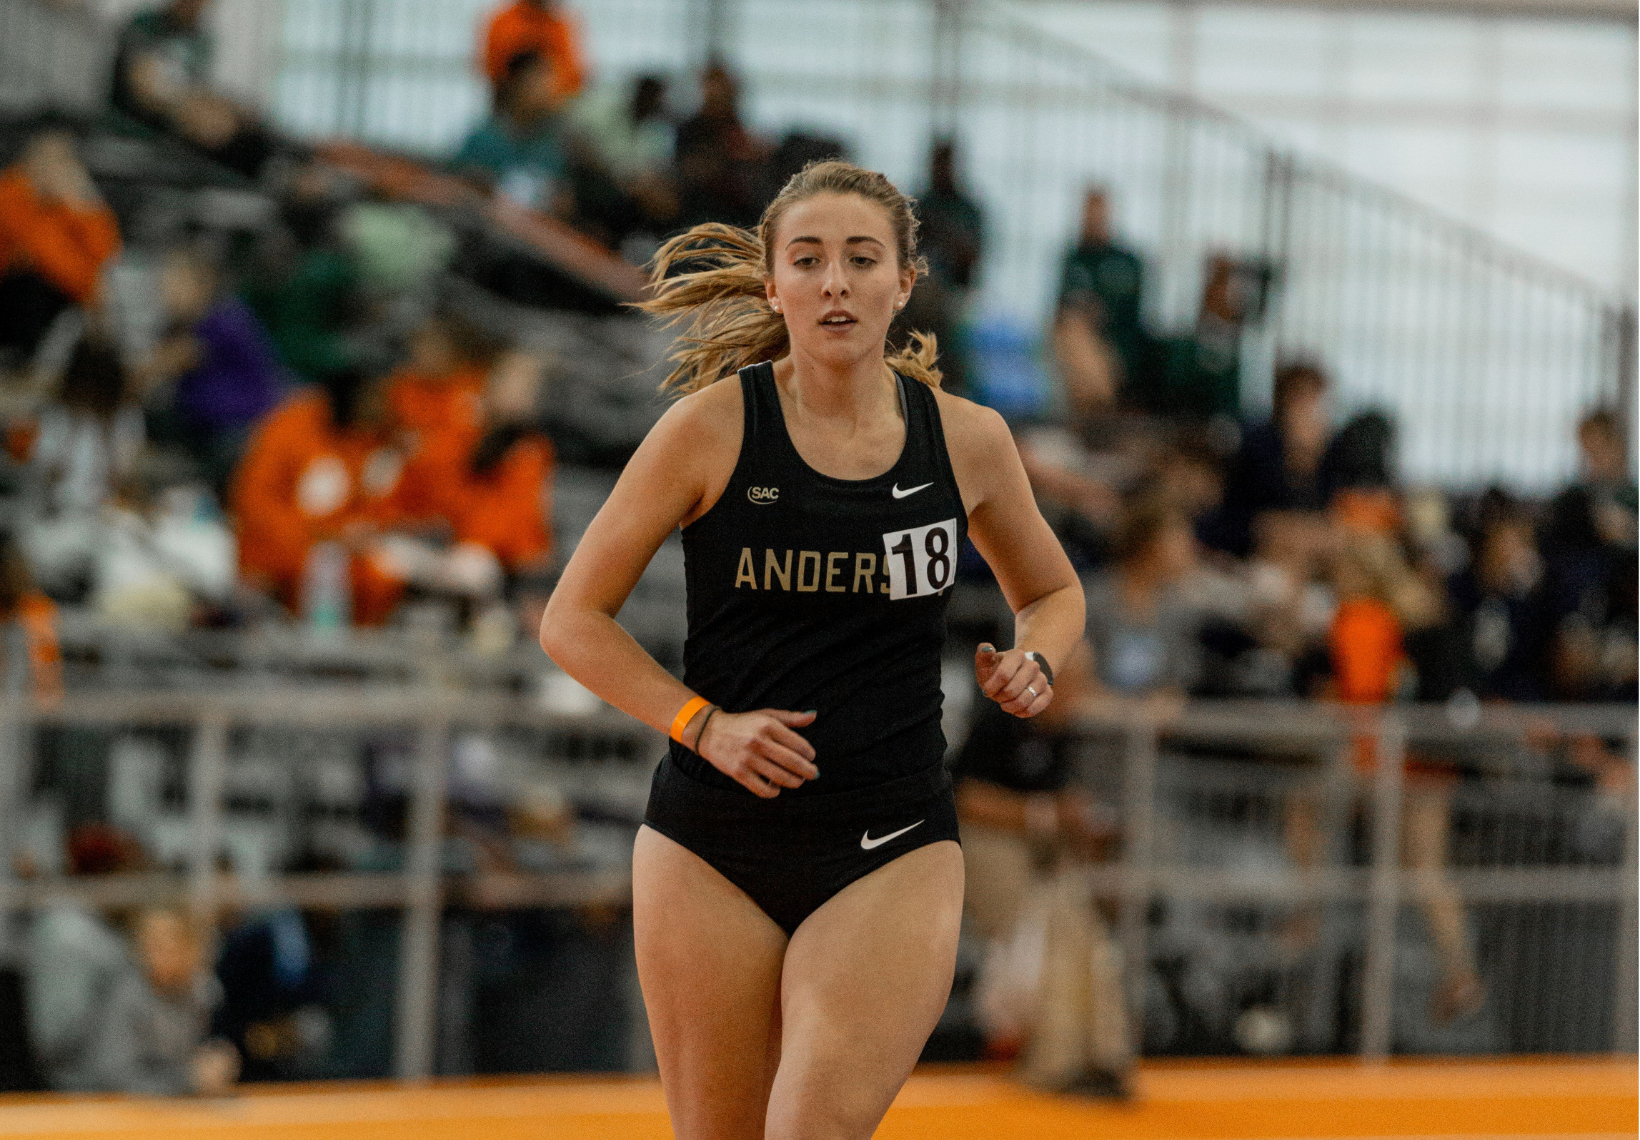 Track to Compete at USC Indoor Open